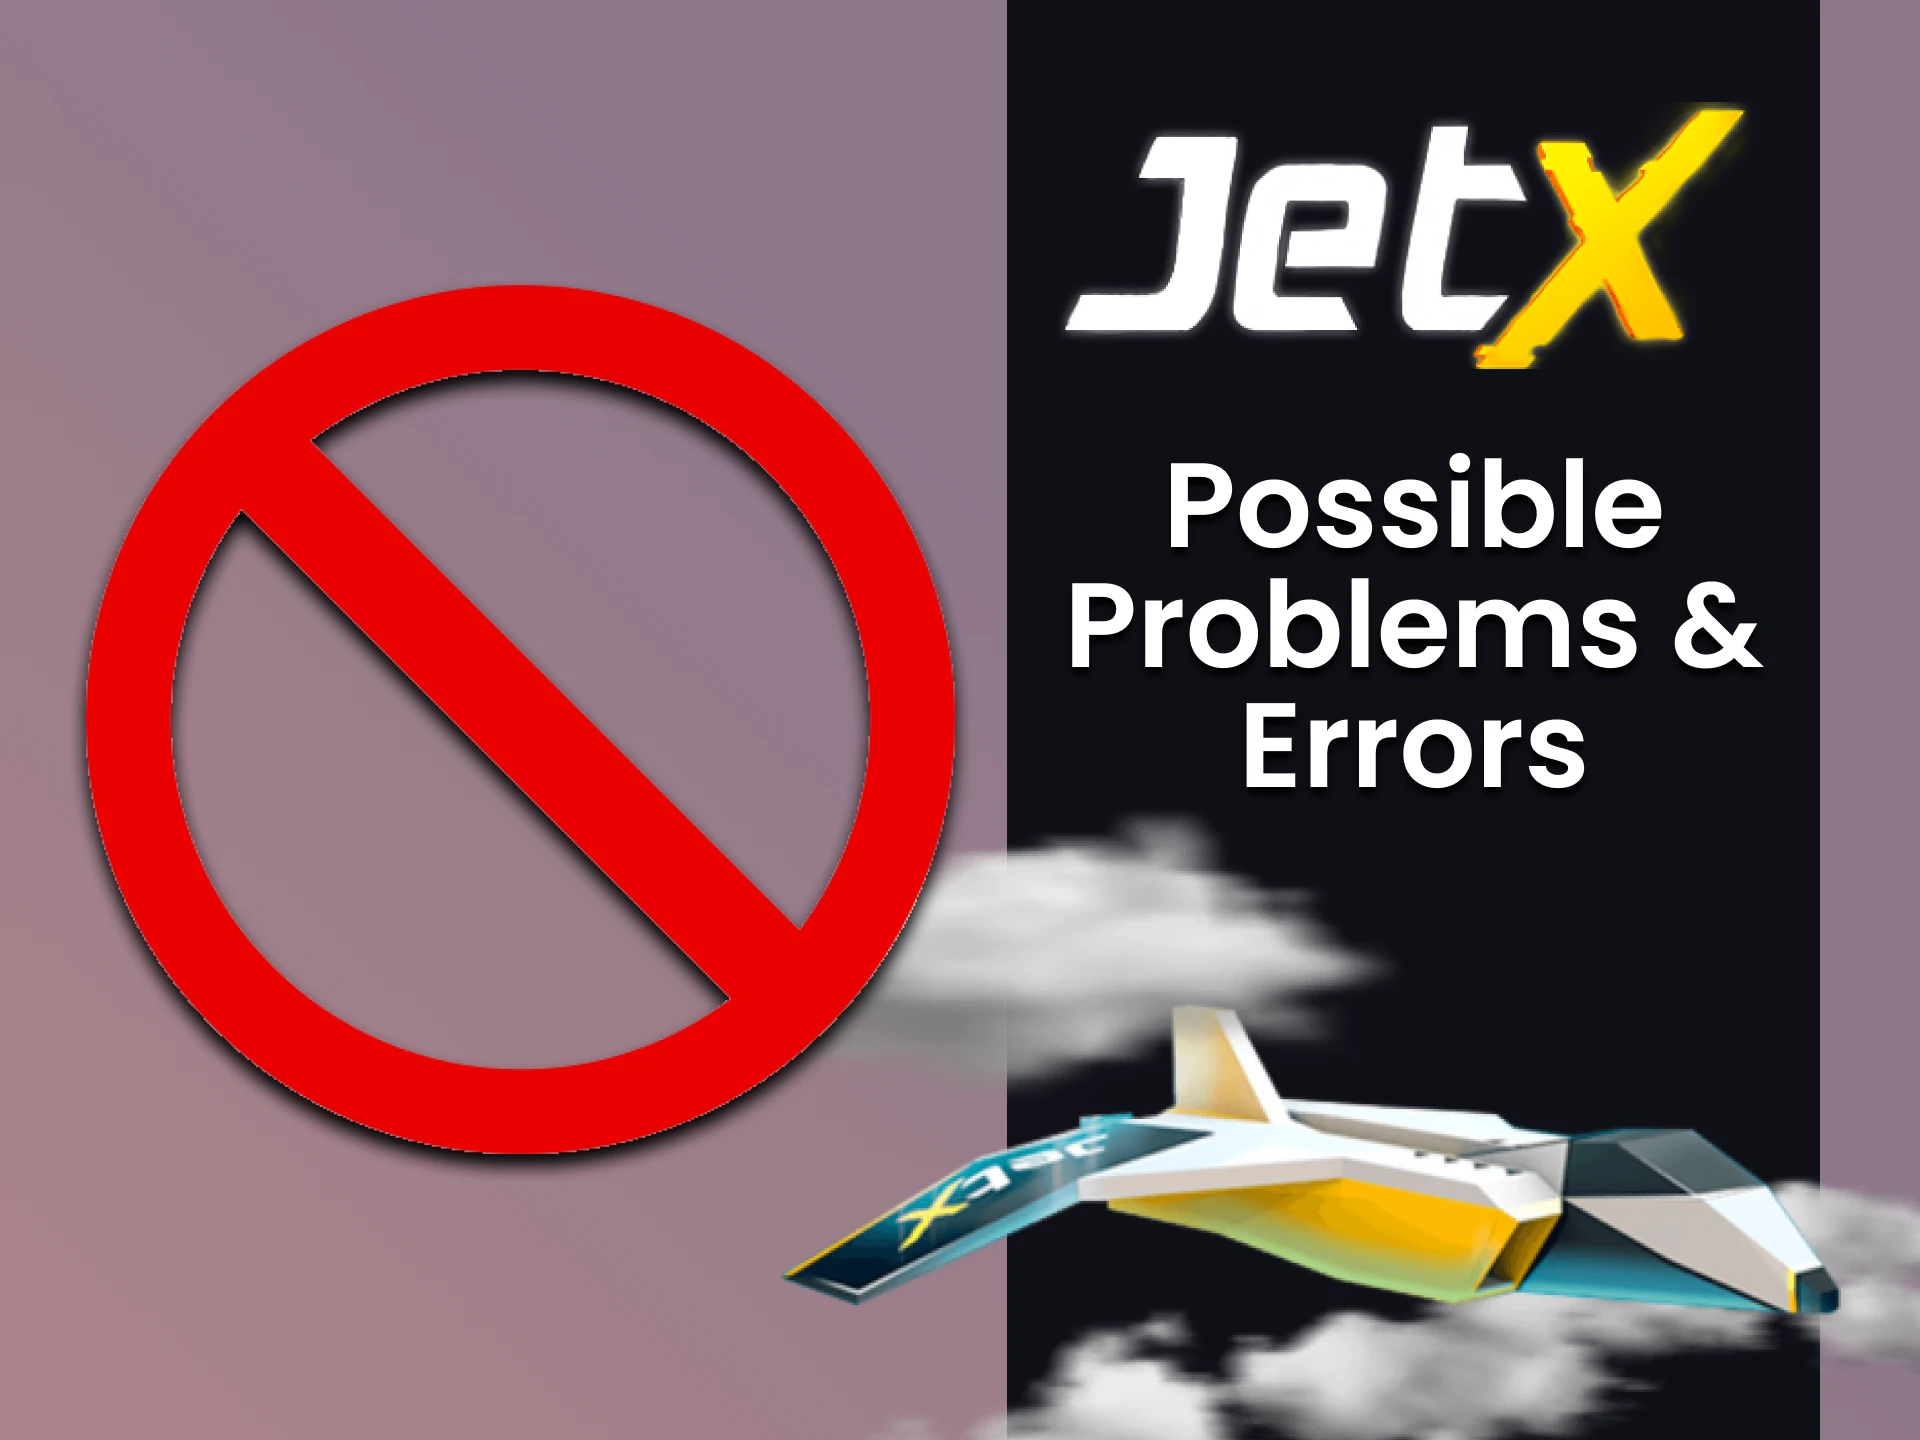 Find out about possible inconveniences when playing JetX on your smartphone.